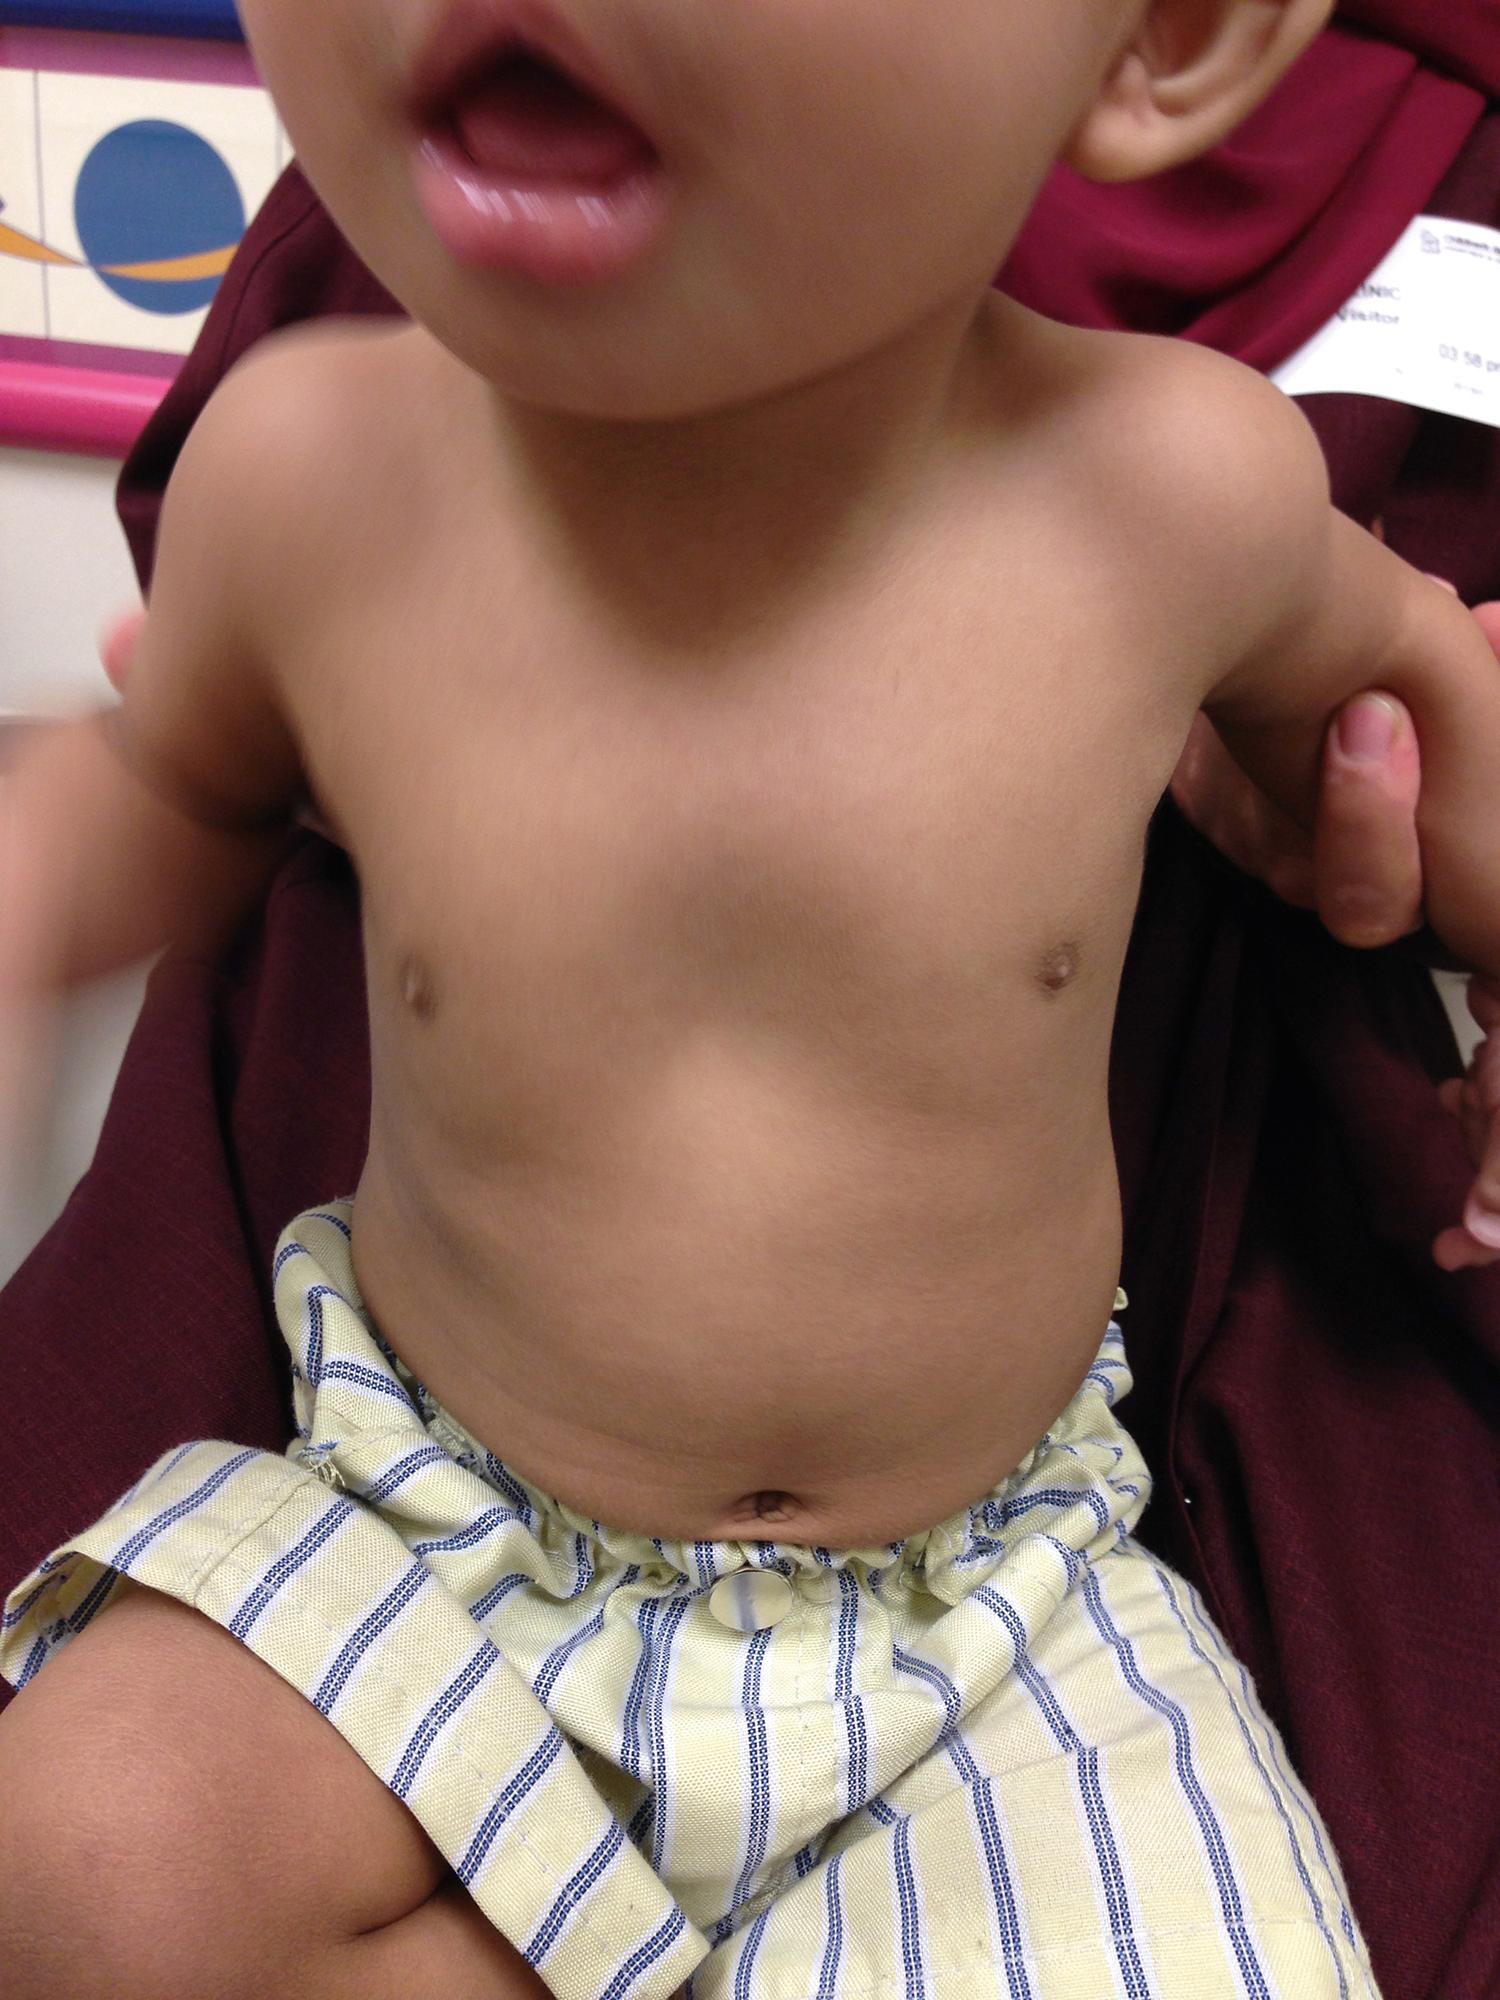 Fig. 20.2, Pectus excavatum is often seen in infants. This 11-month-old child was evaluated for a pectus excavatum. Observation was recommended.